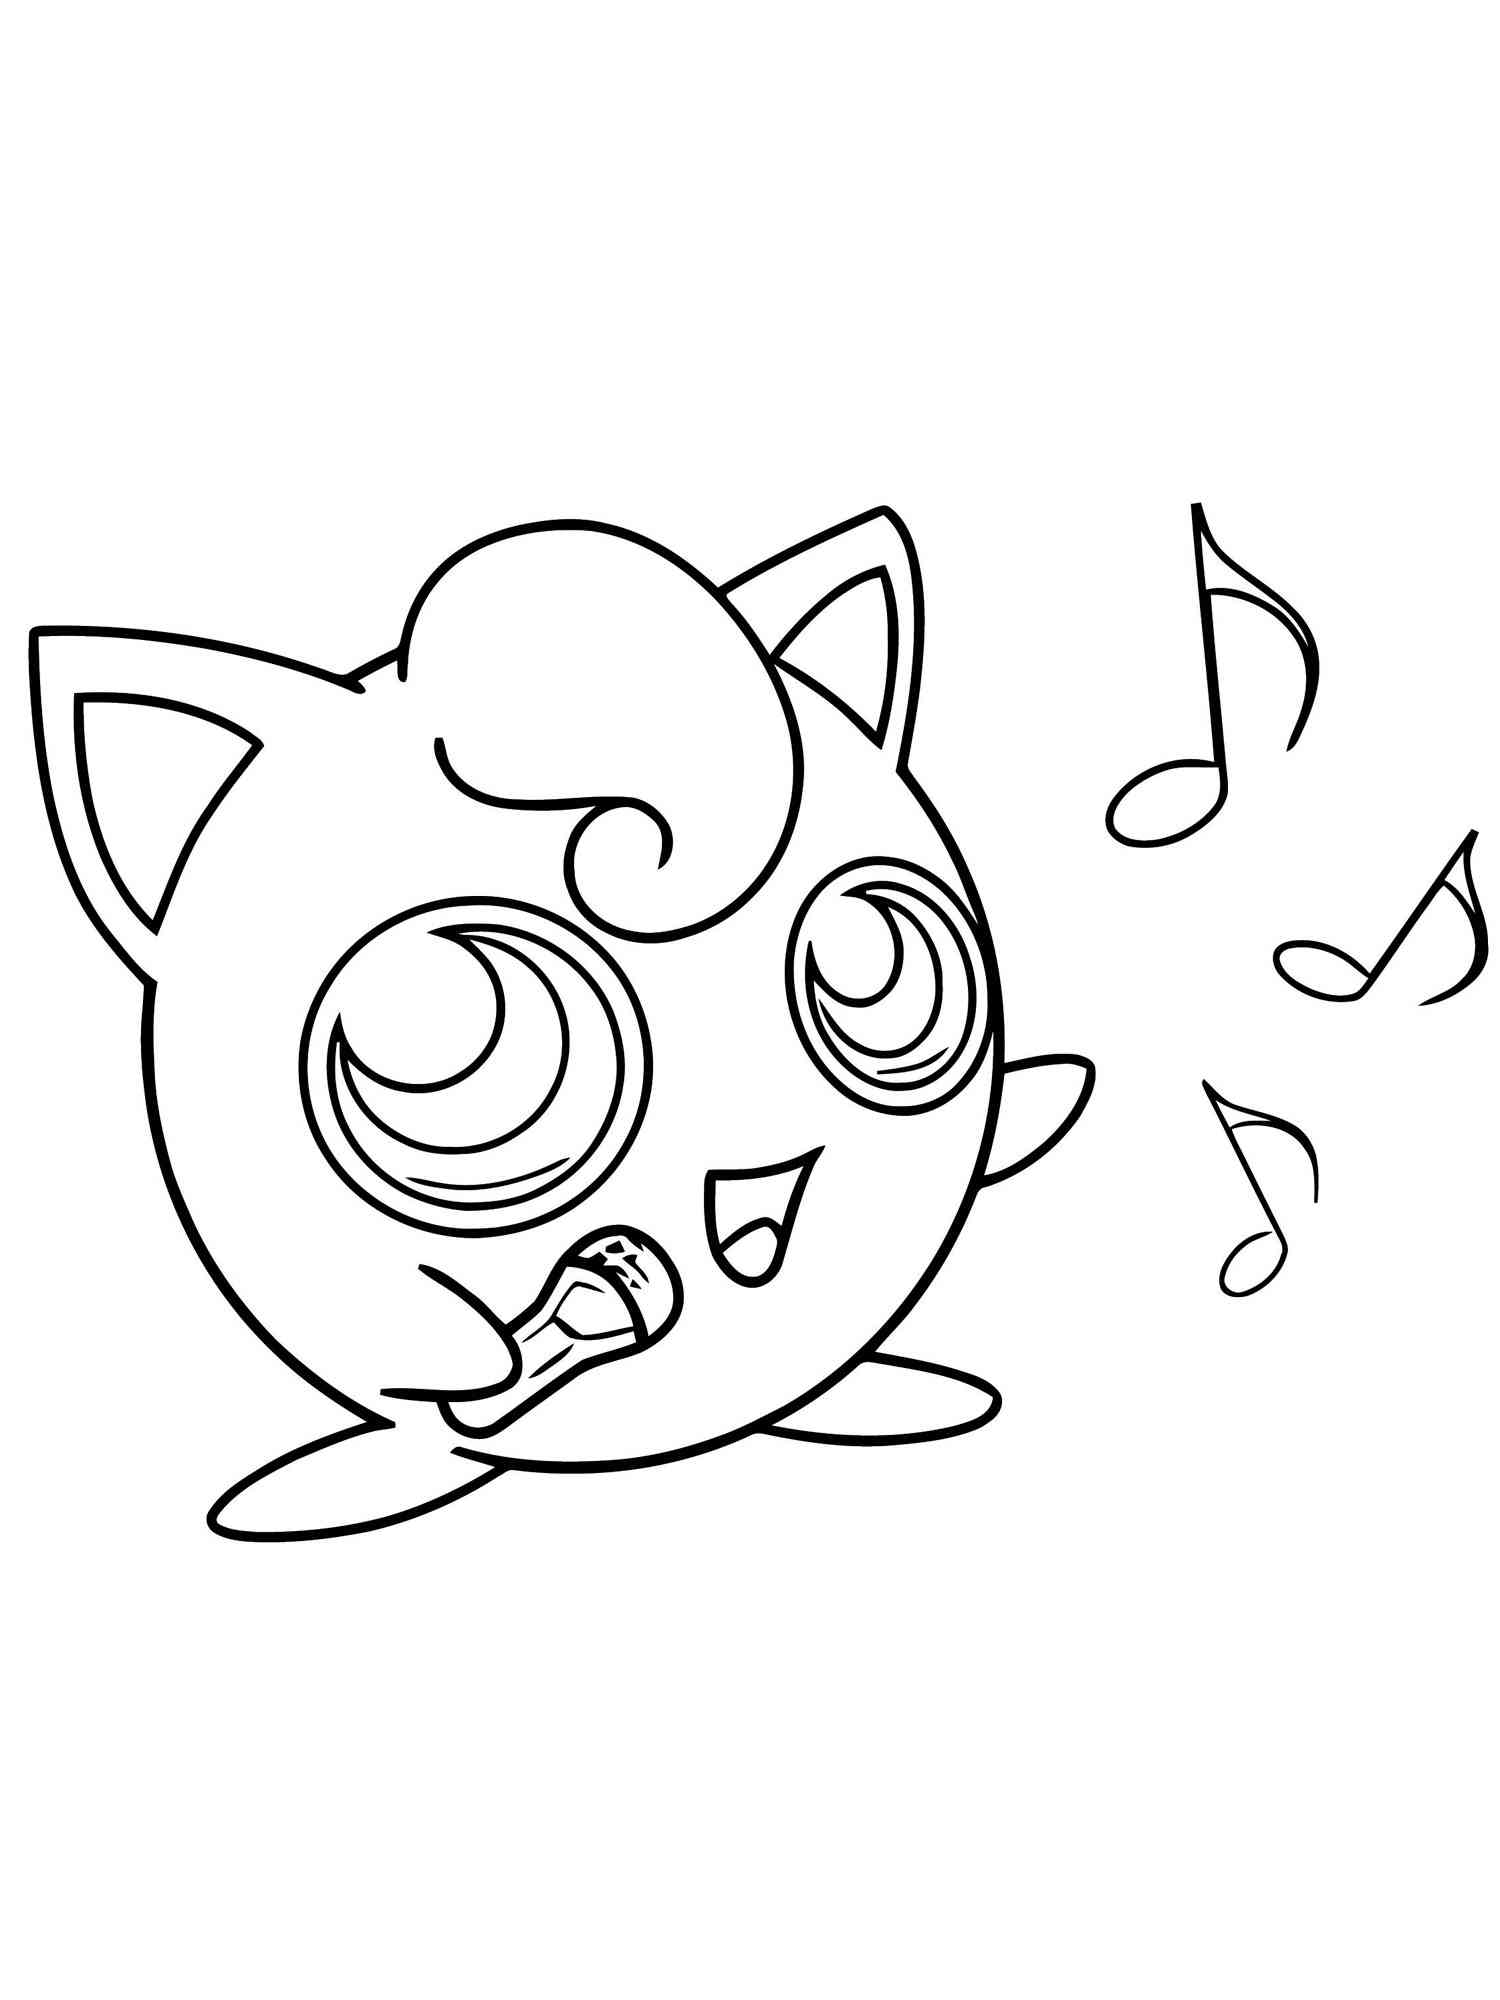 Pokemon jigglypuff coloring pages